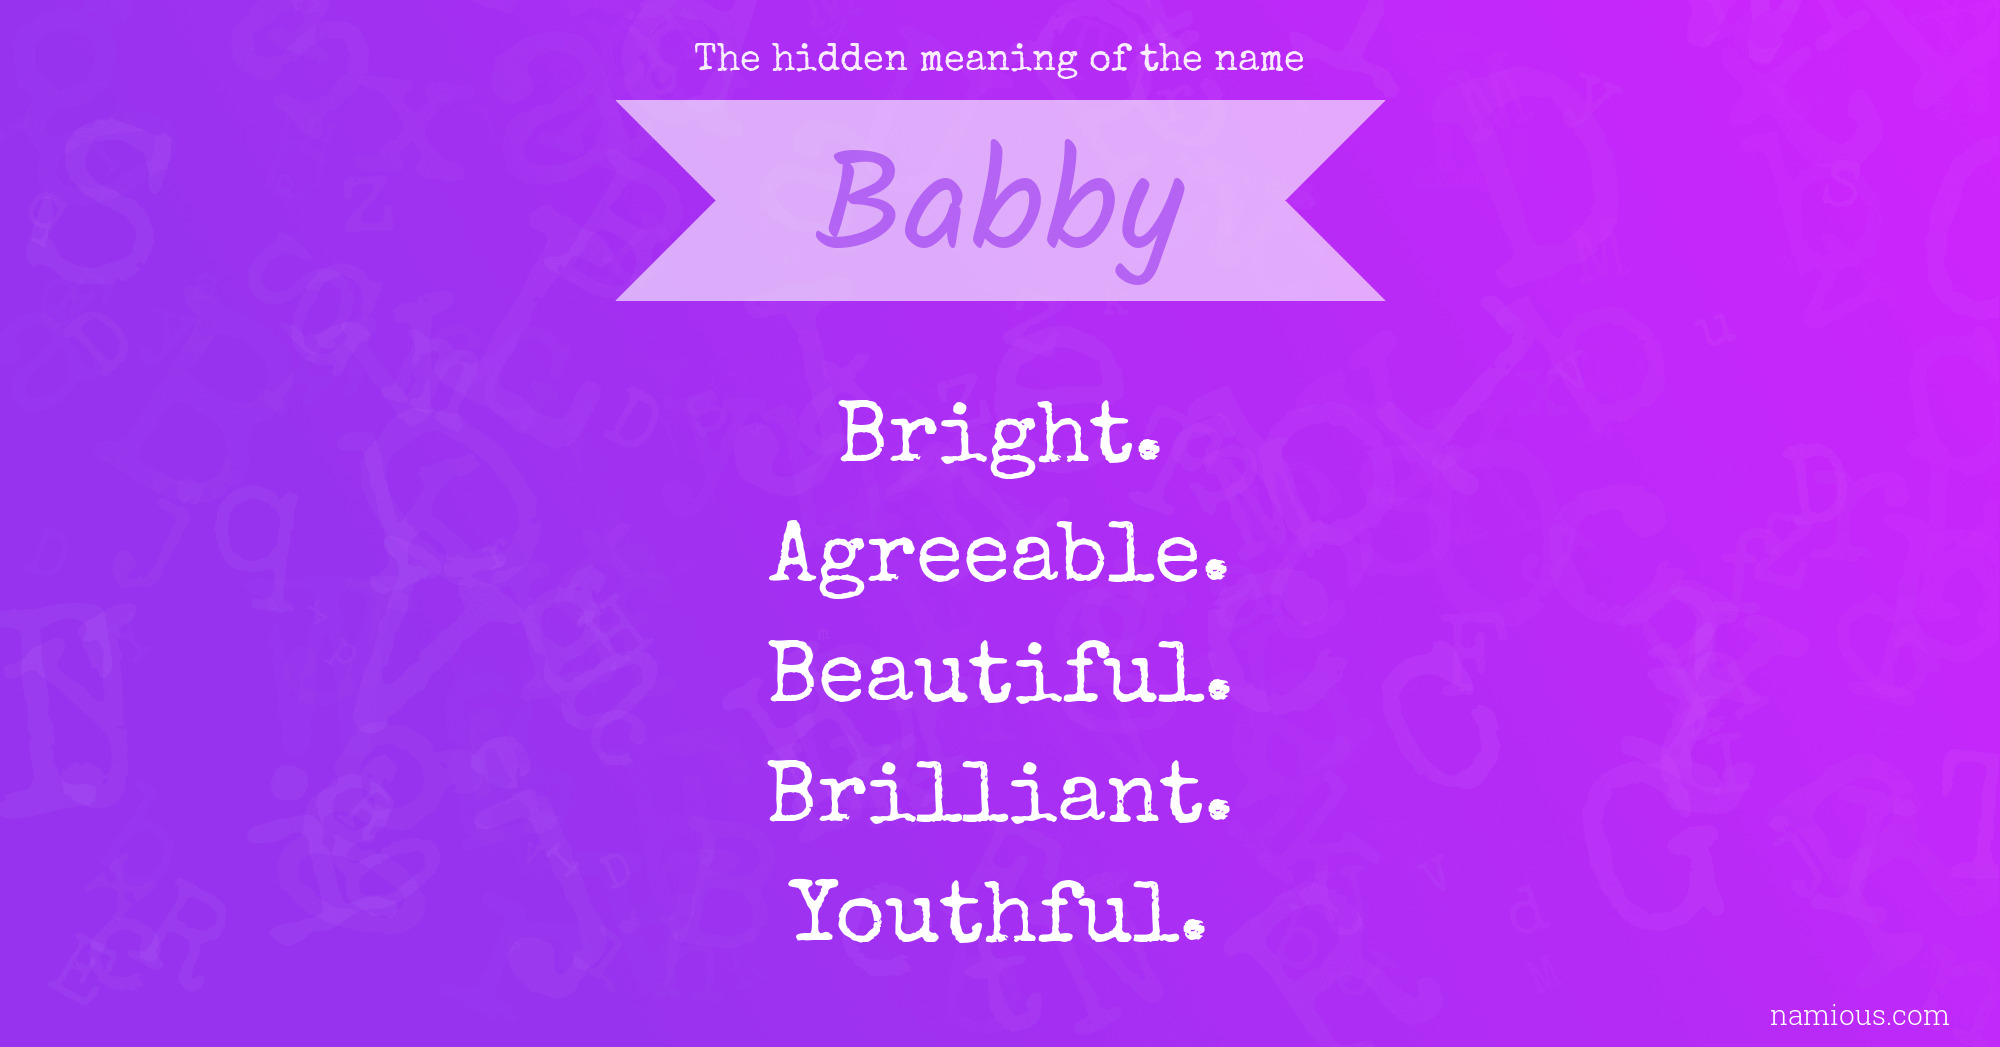 The hidden meaning of the name Babby